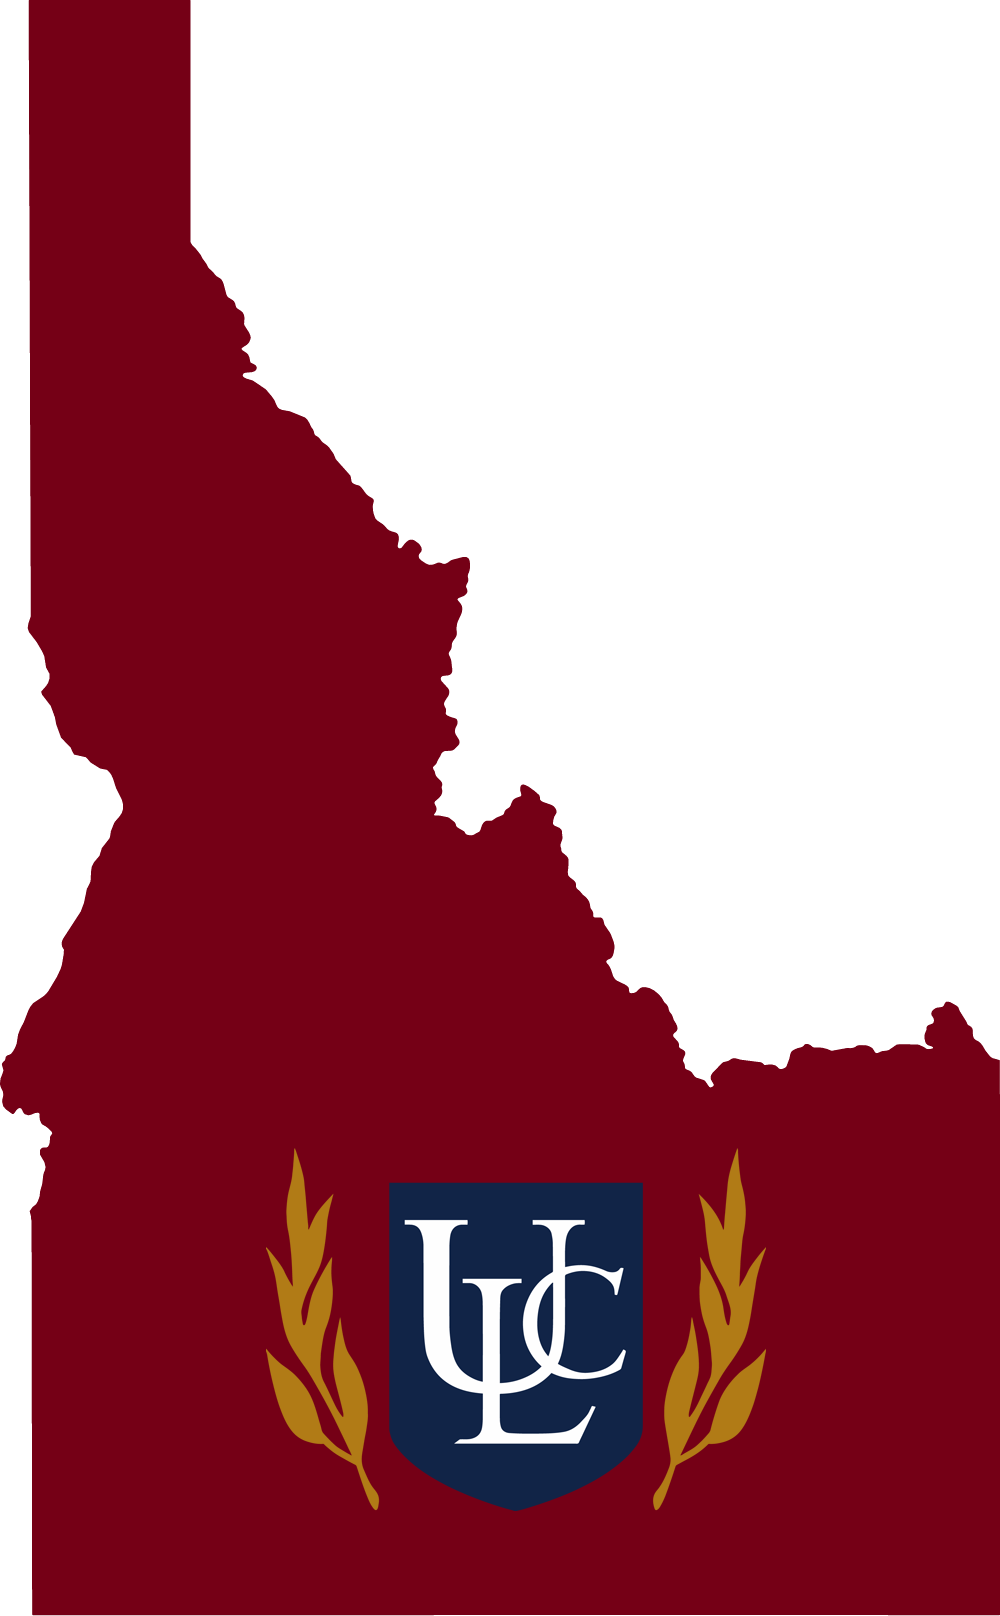 An outline of Idaho with the ULC logo